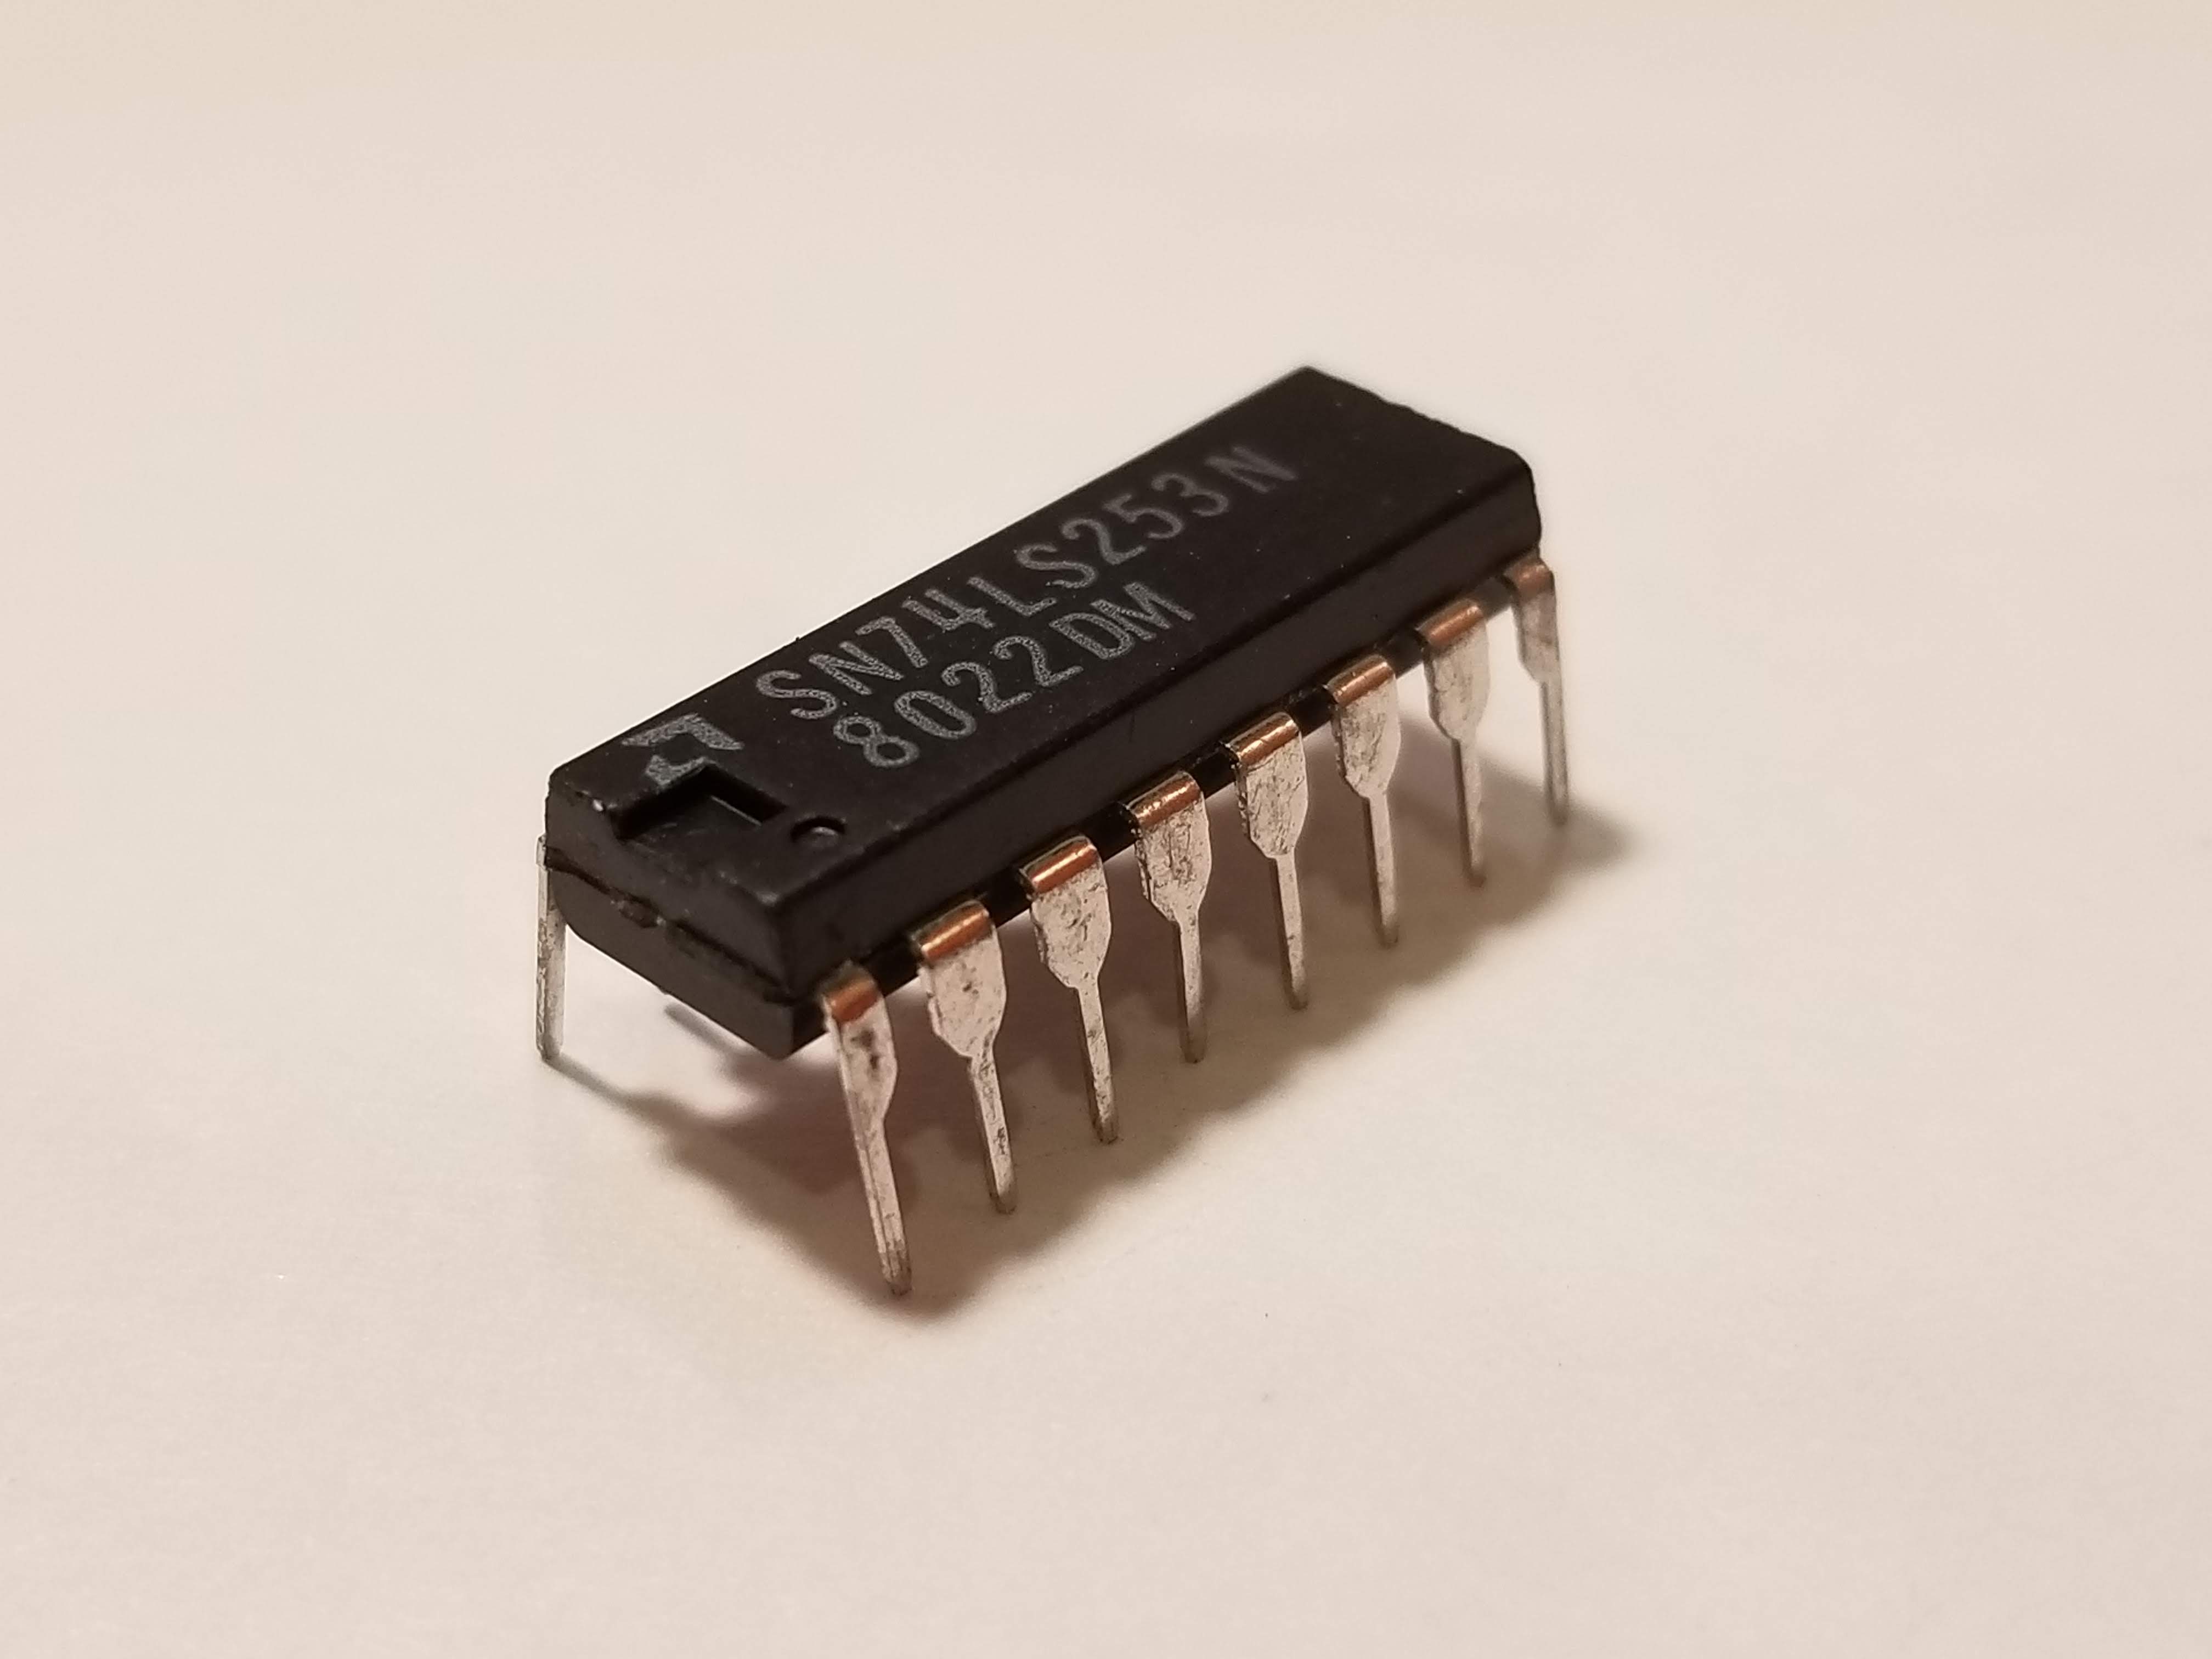 Picture of 74253 Tristate Dual 4-to-1 Mulitplexer